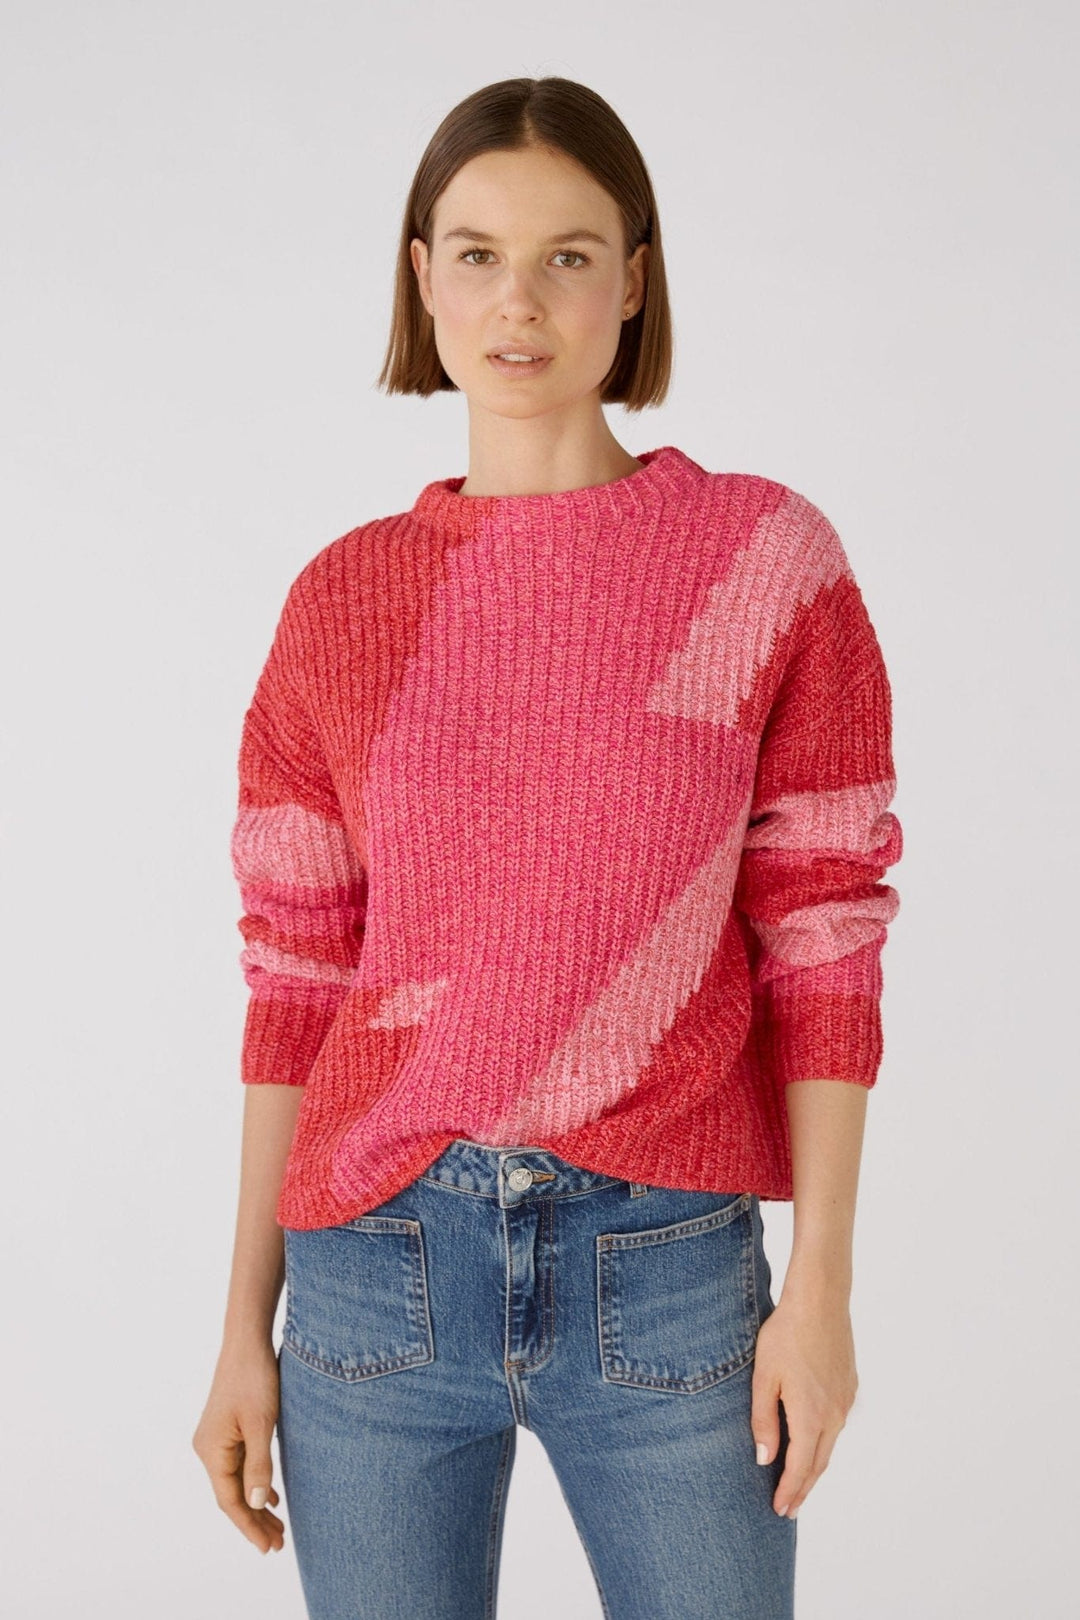 Oui Block Line Knitted Jumper In Red & Coral - Crabtree Cottage